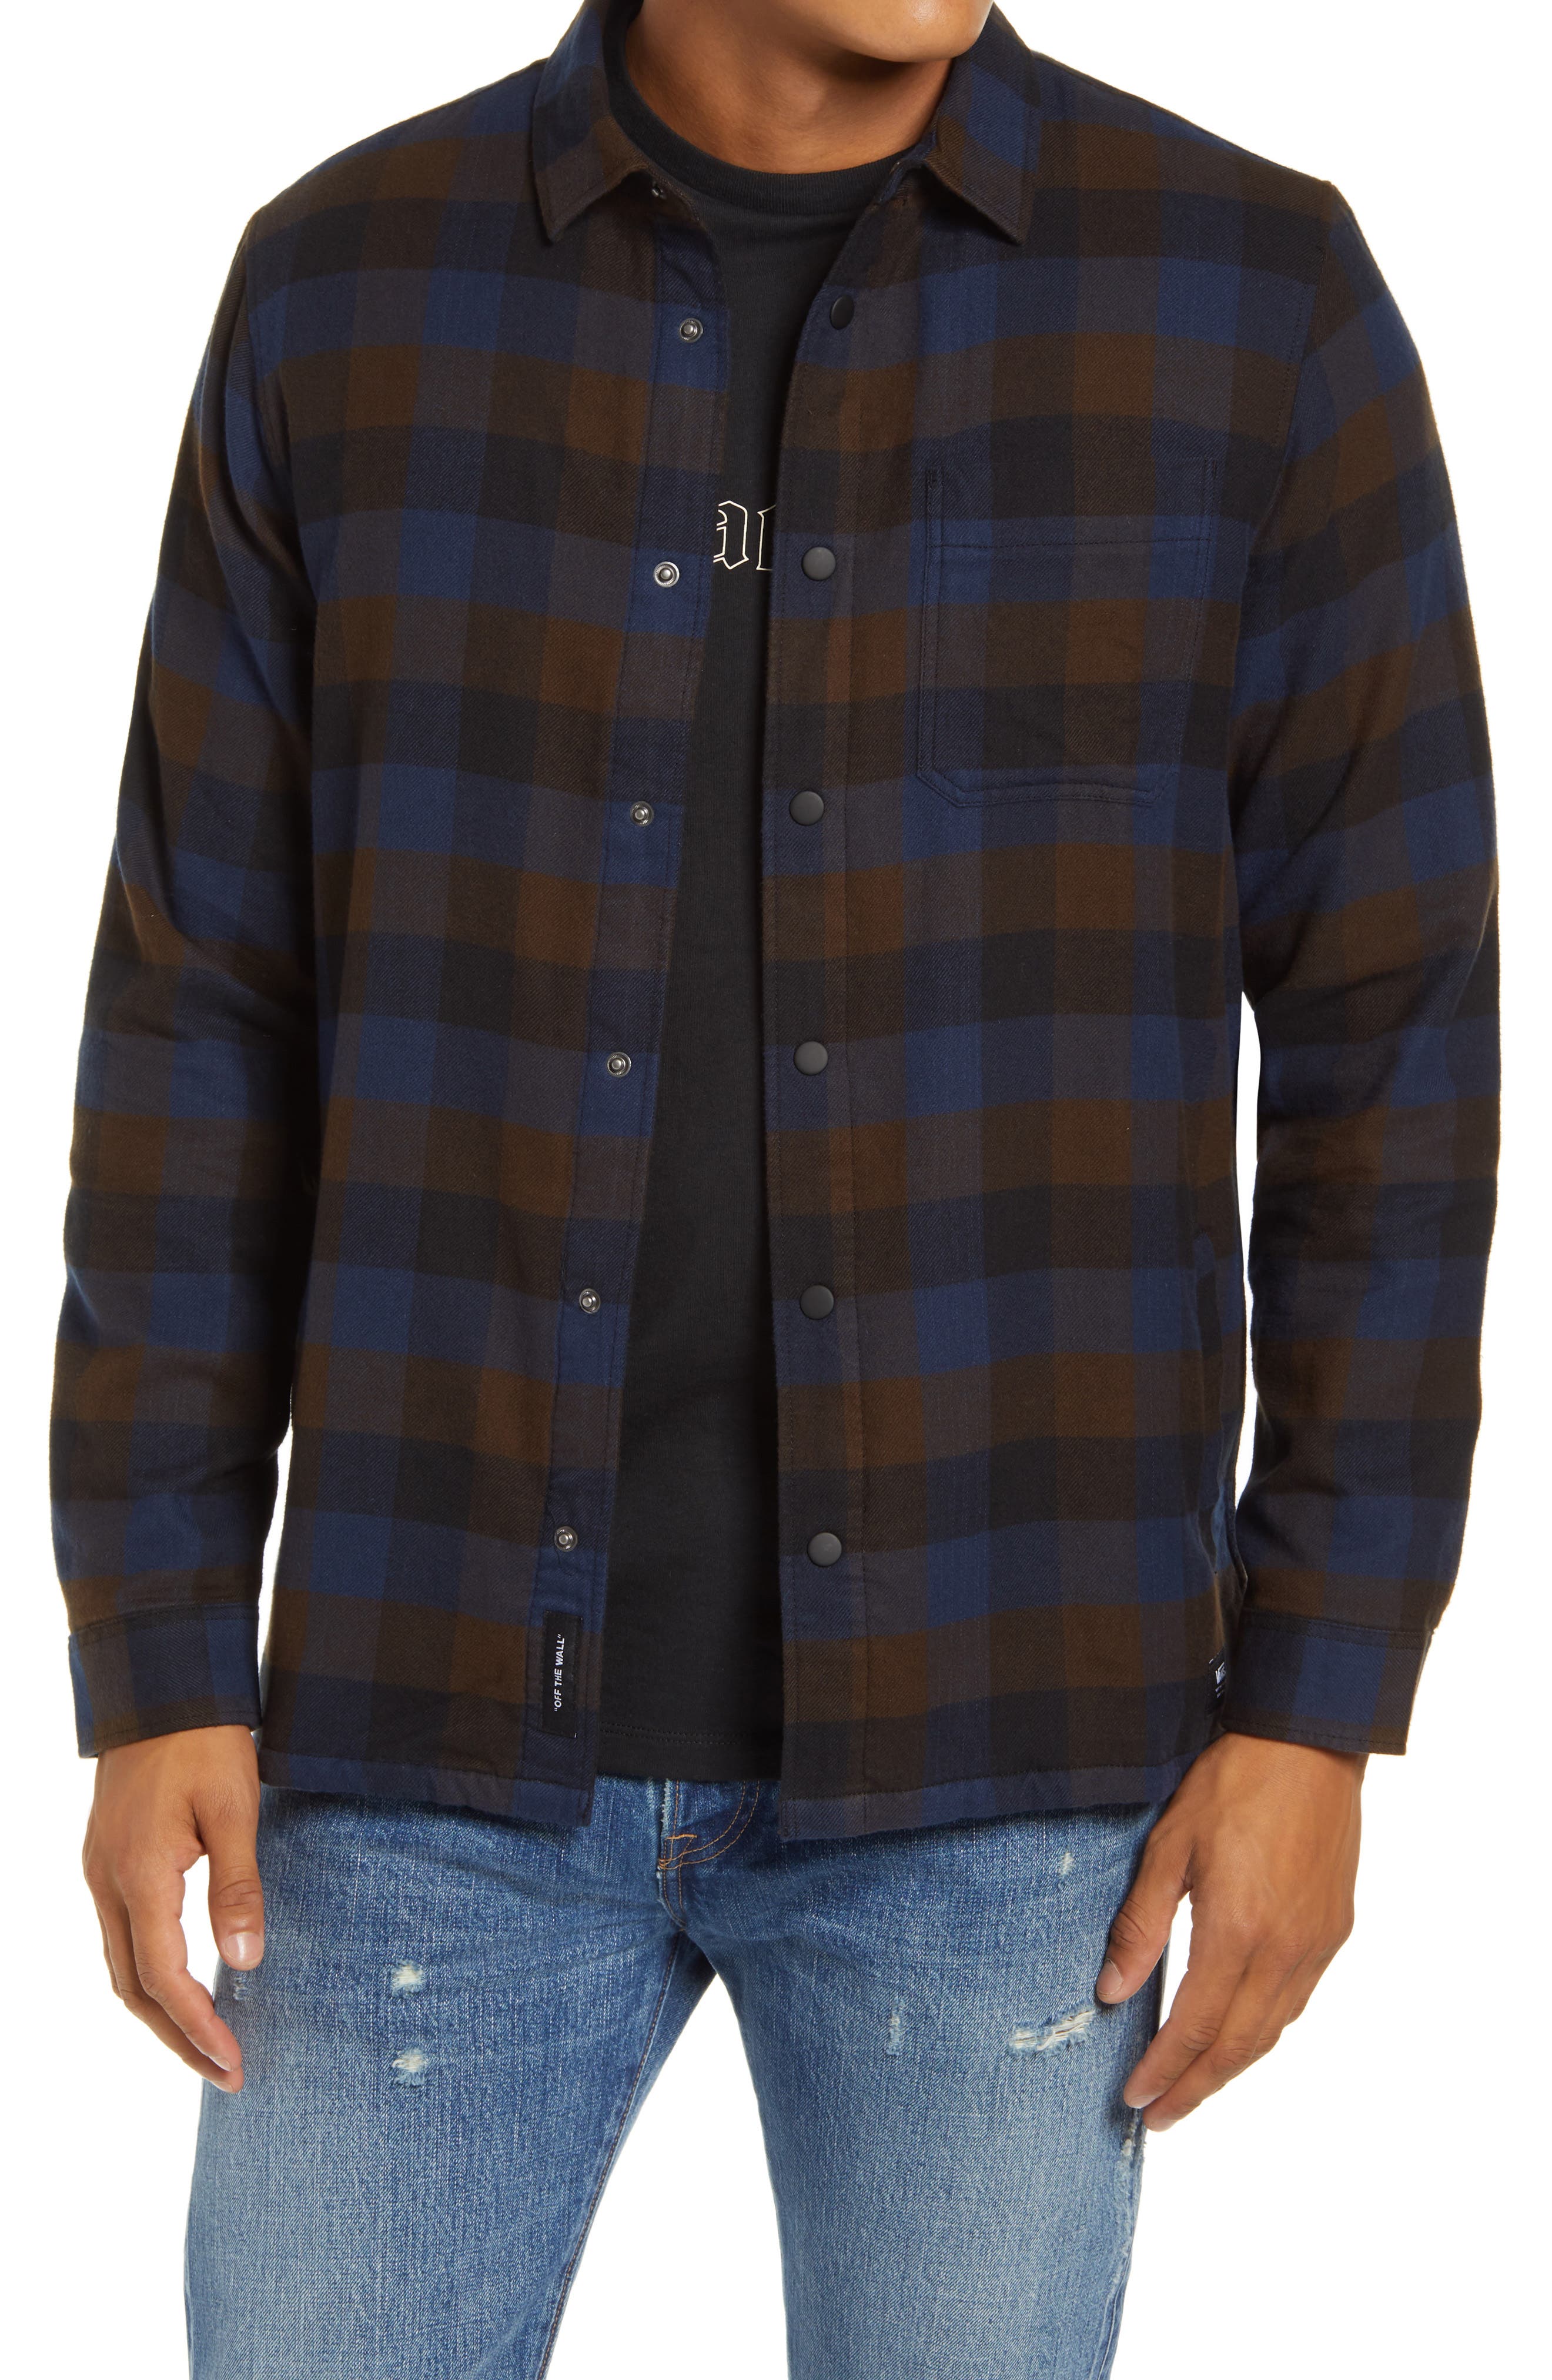 vans off the wall flannel